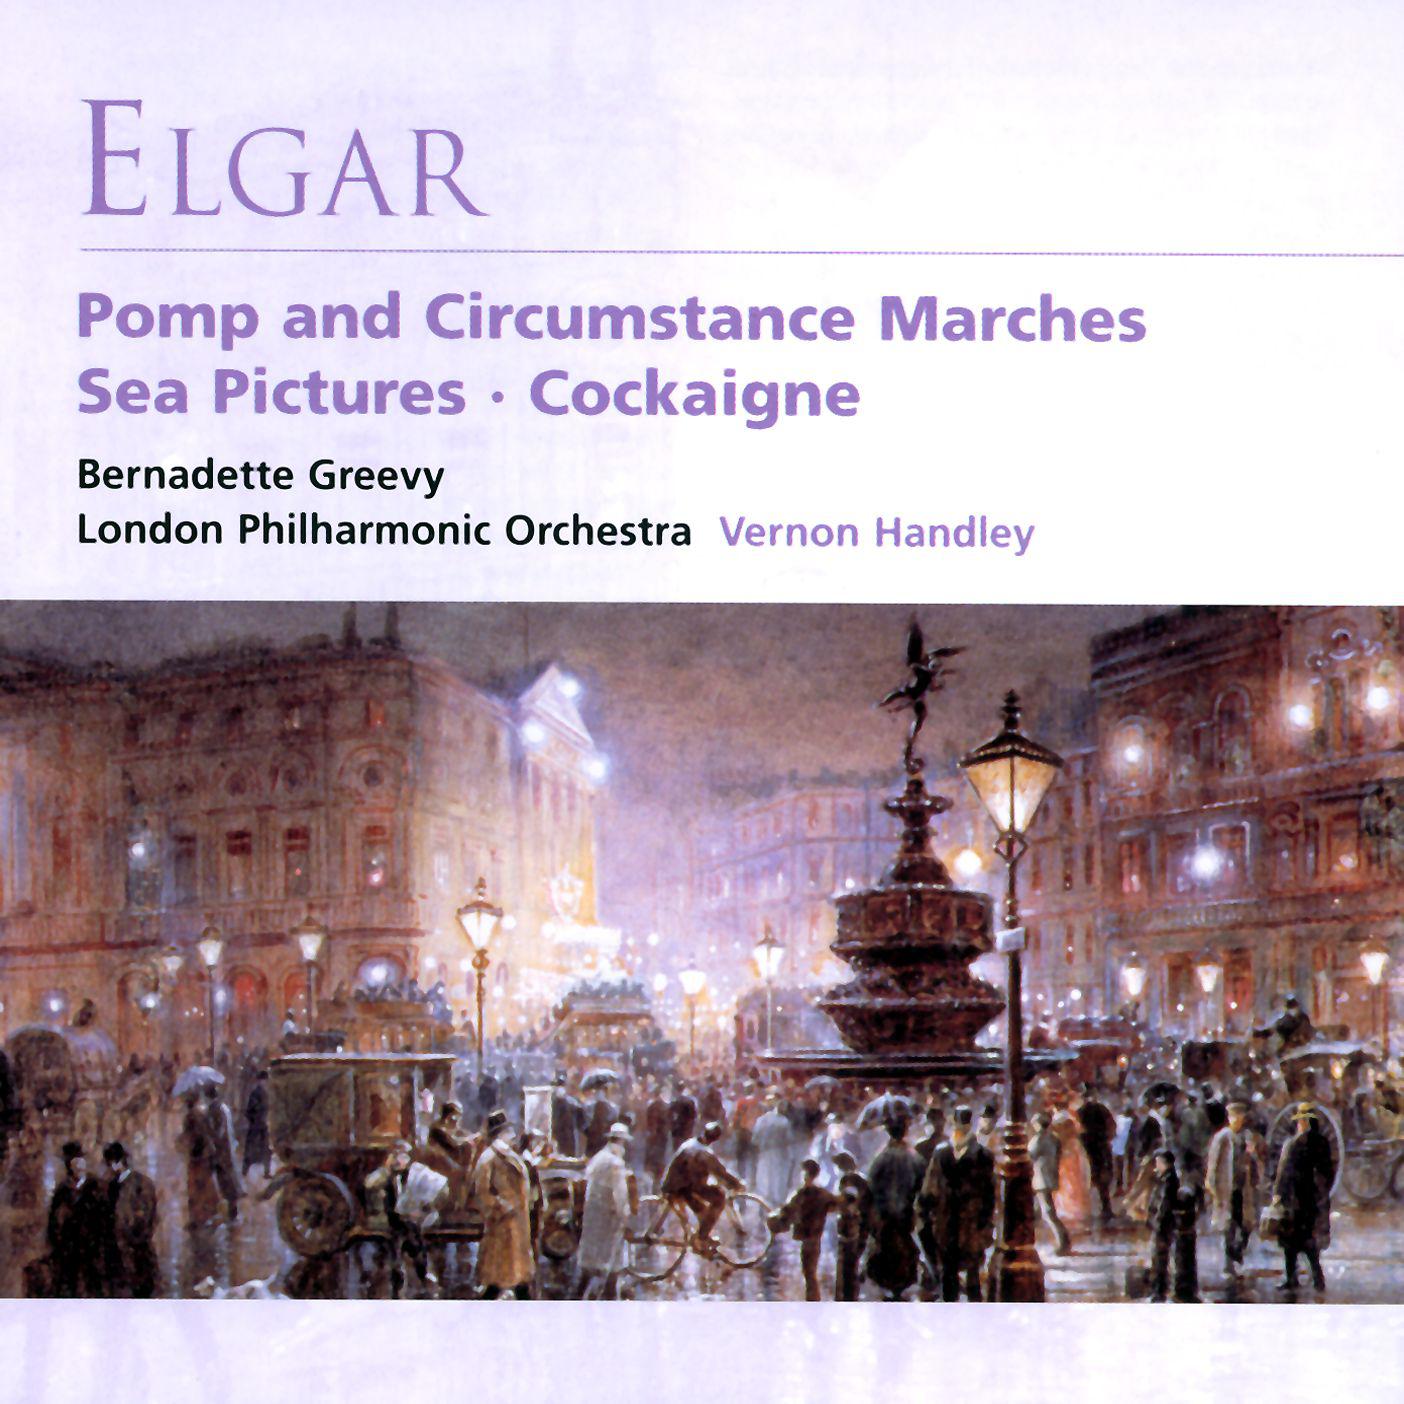 Pomp and Circumstance - Military Marches, Op.39: No. 5 in C